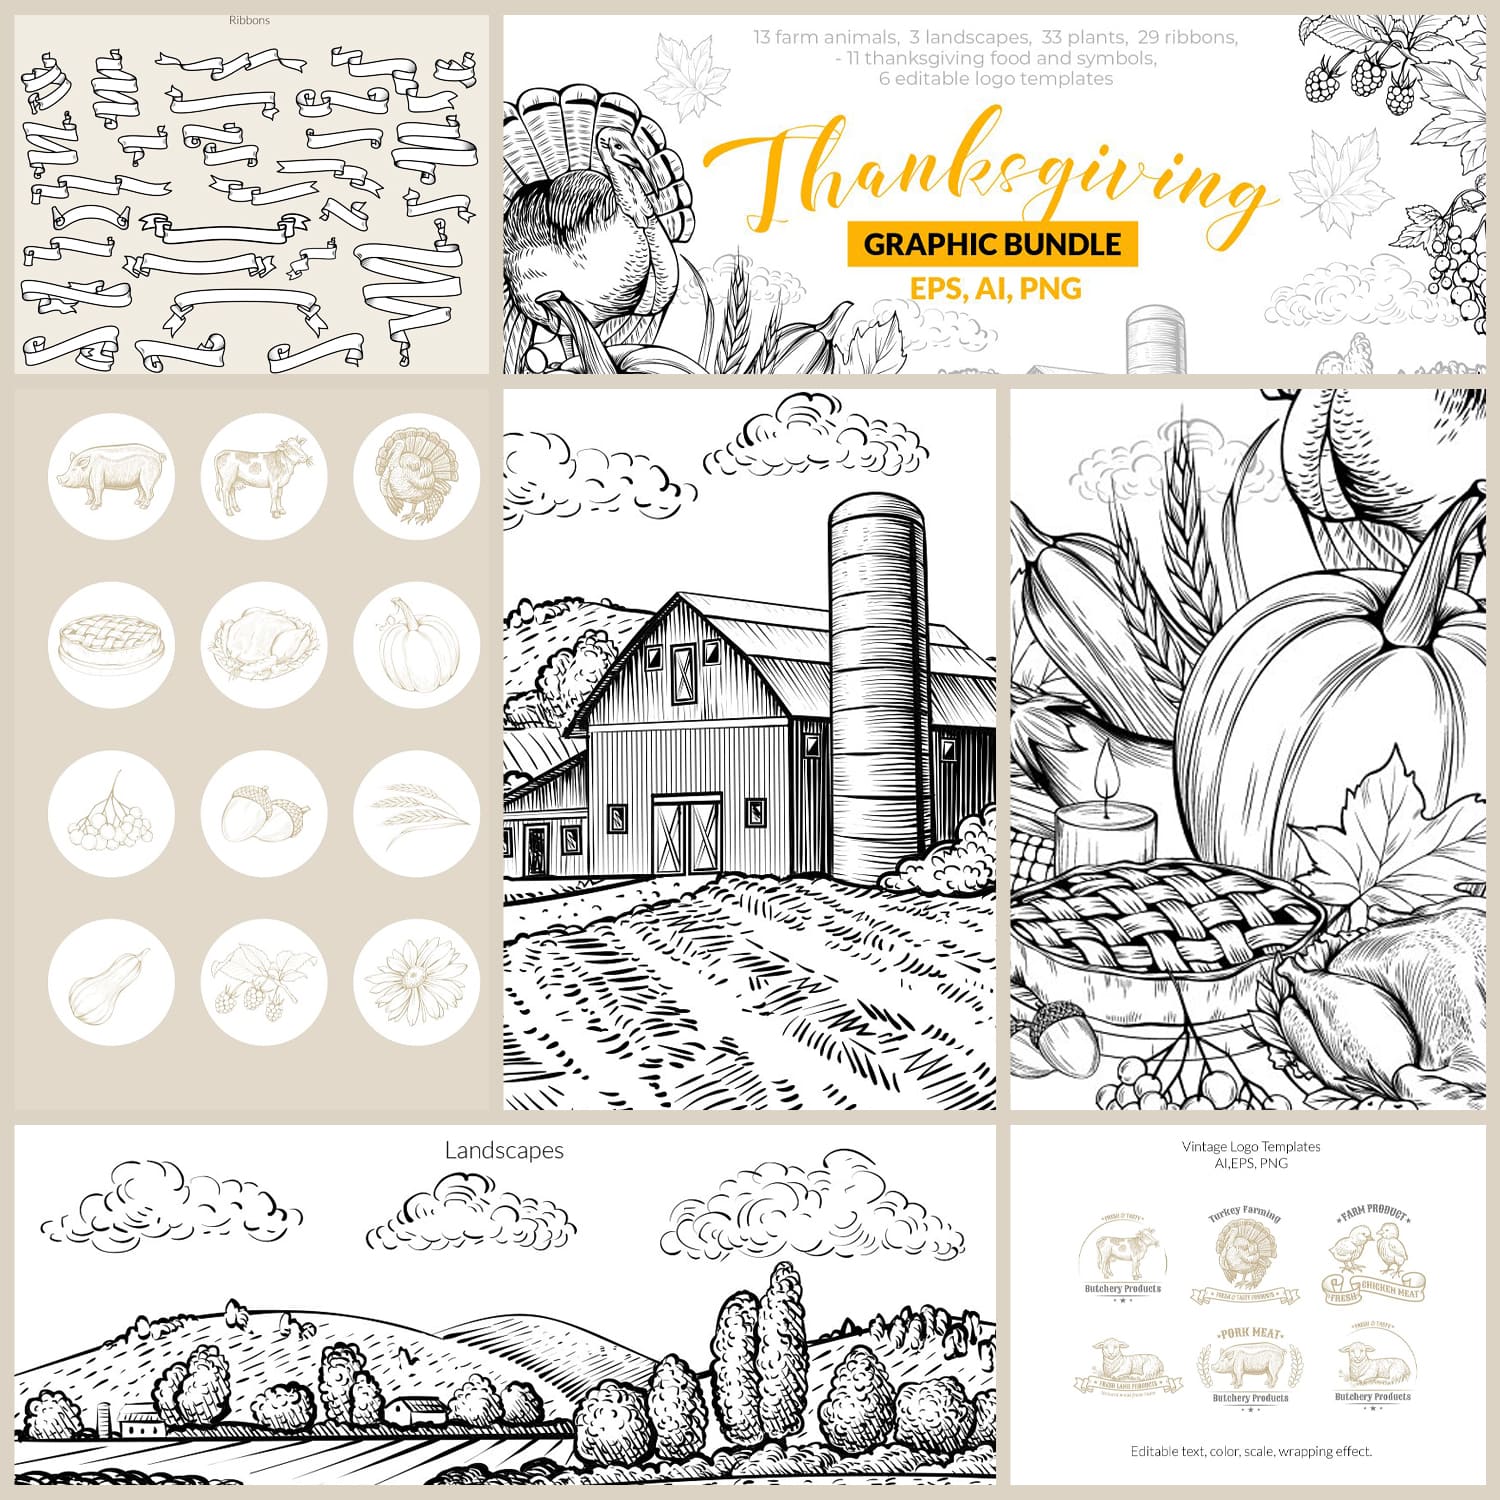 The bundle of thanksgiving graphics - pinterest image preview.